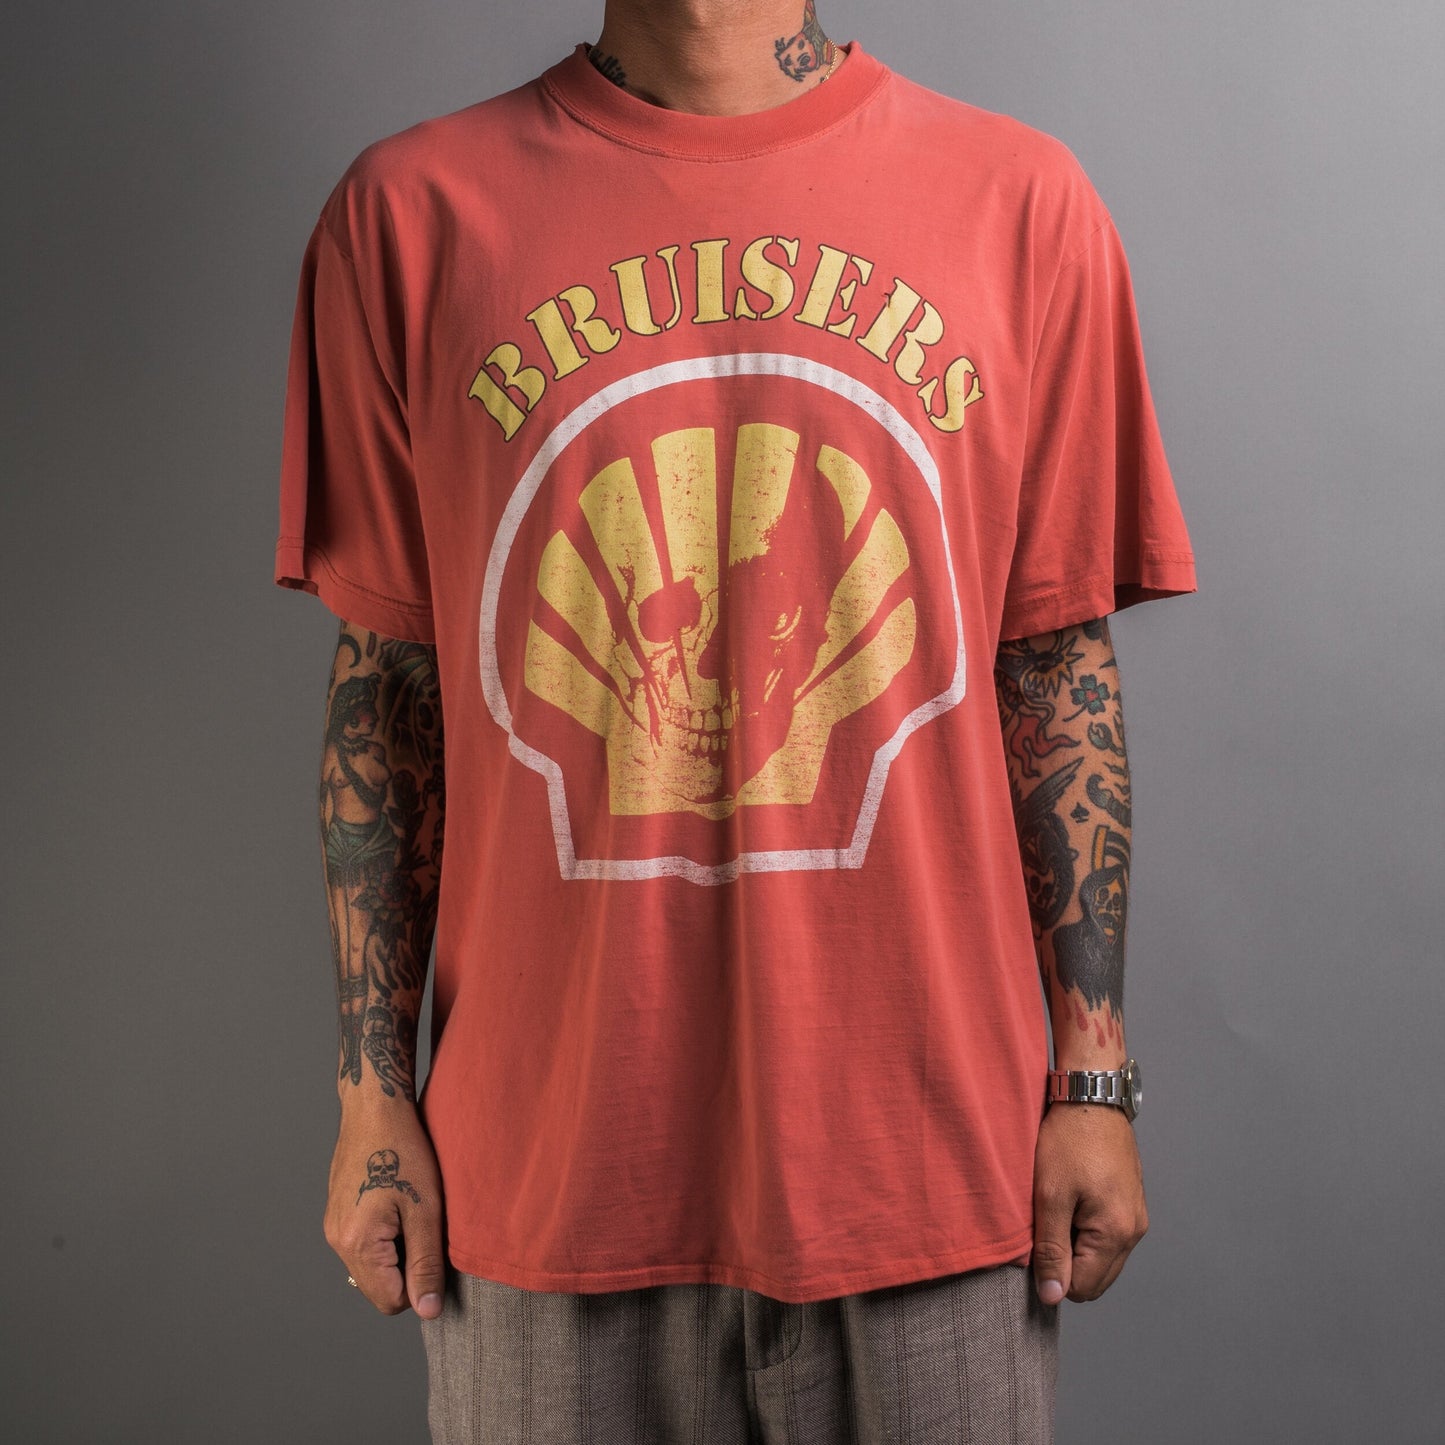 Vintage 90’s Bruisers Cruisin’ For A Brusin’ T-Shirt